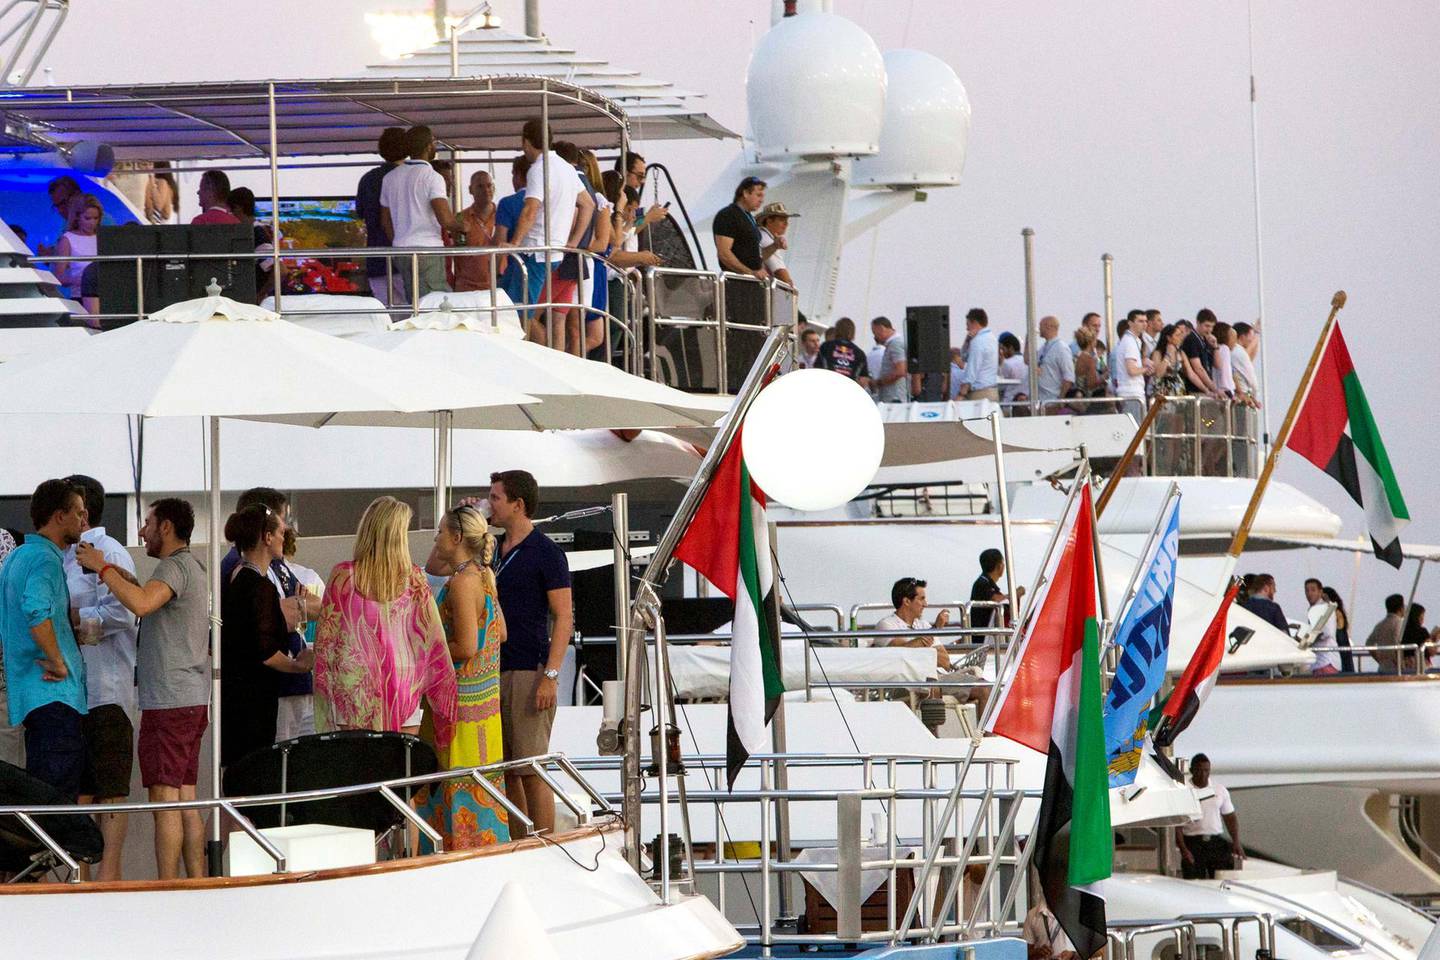 There will be a number of yacht parties taking place over race weekend in Abu Dhabi. Christopher Pike / The National